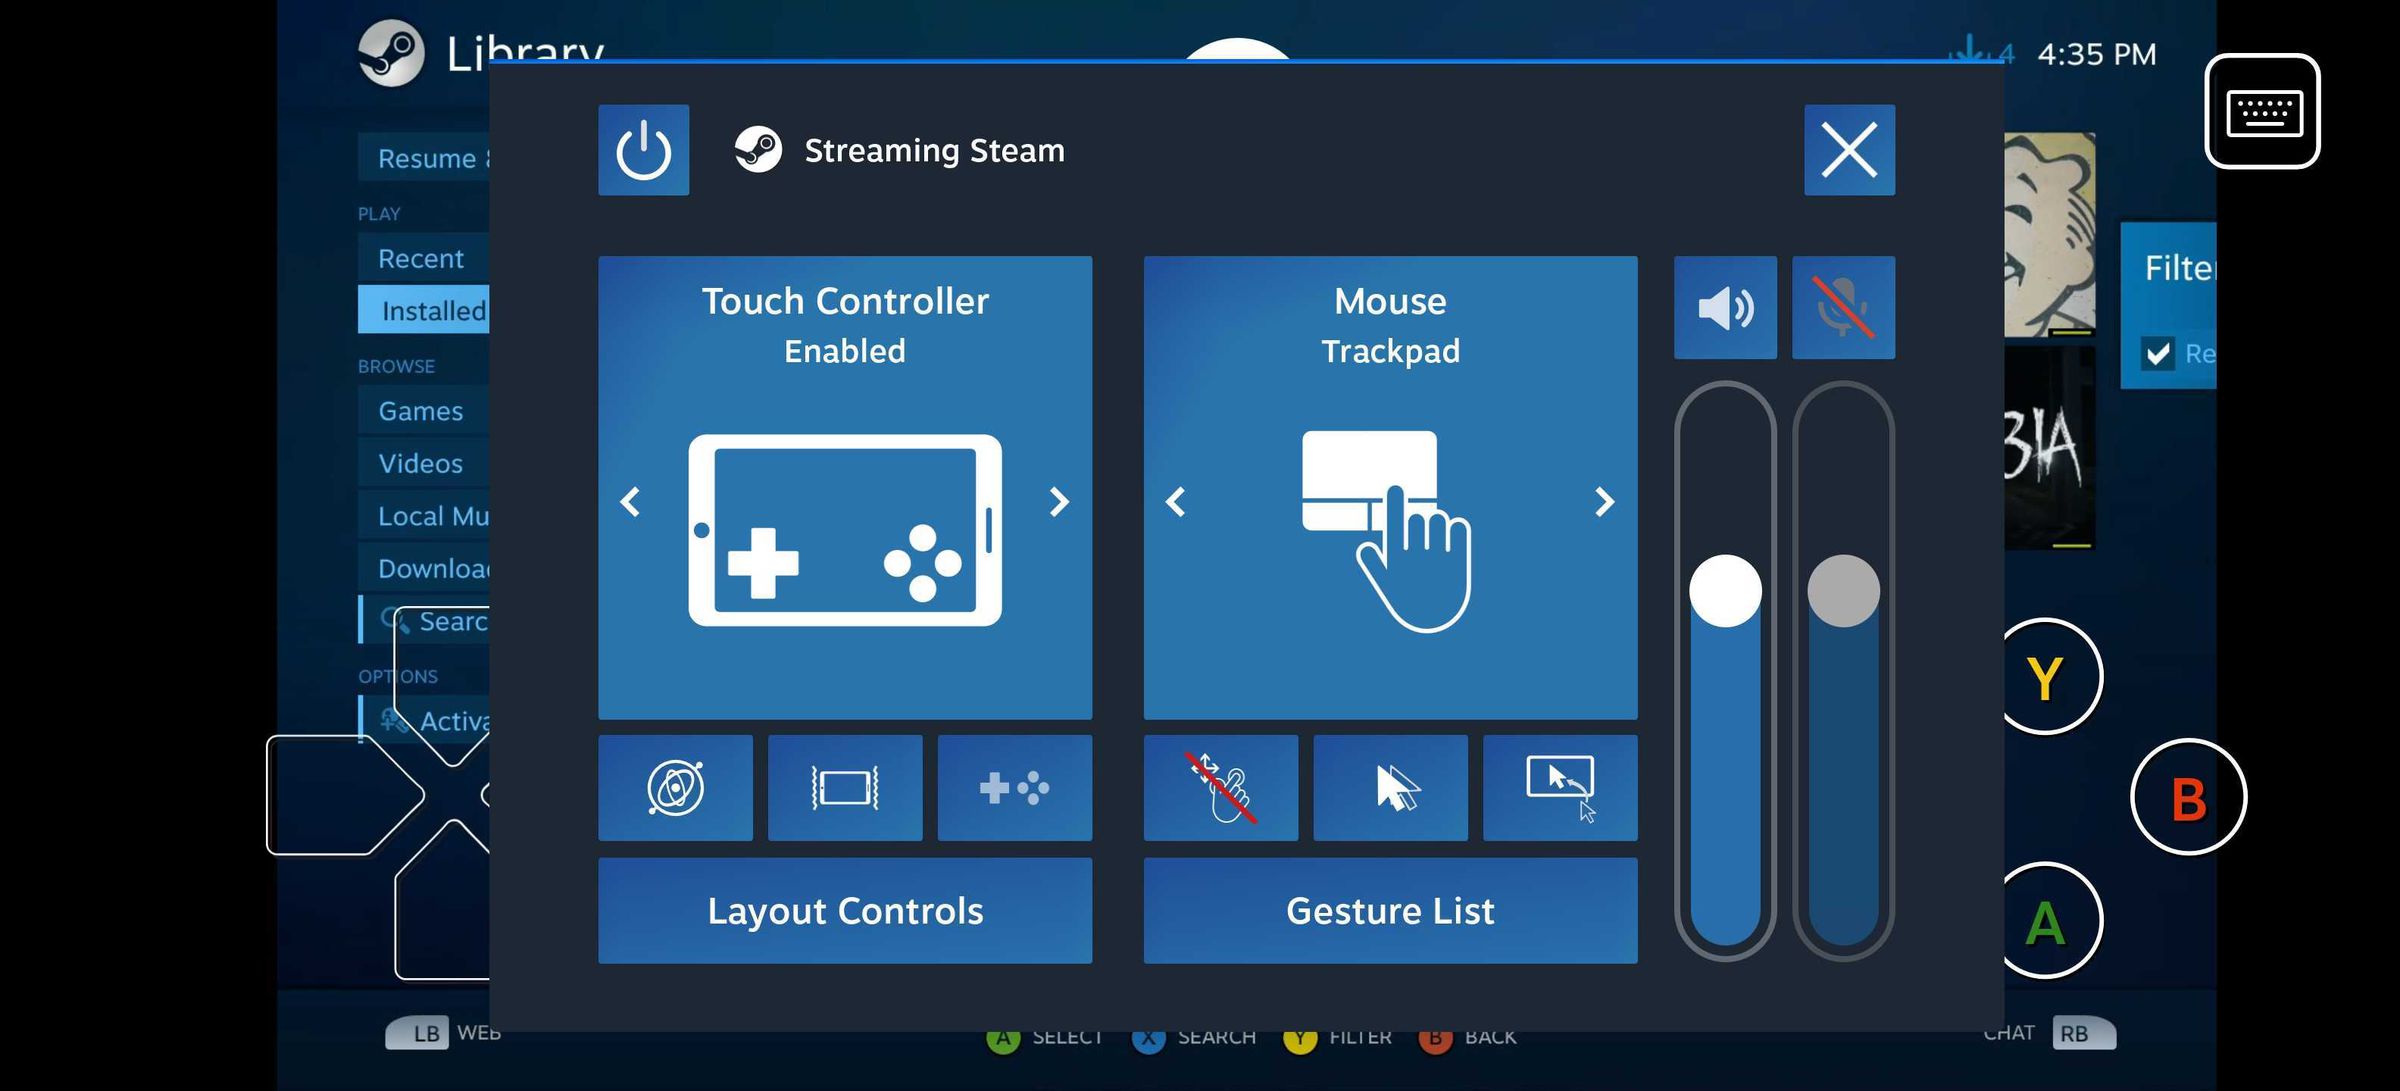 You can fine tune many of the touch controls in the Steam Link app